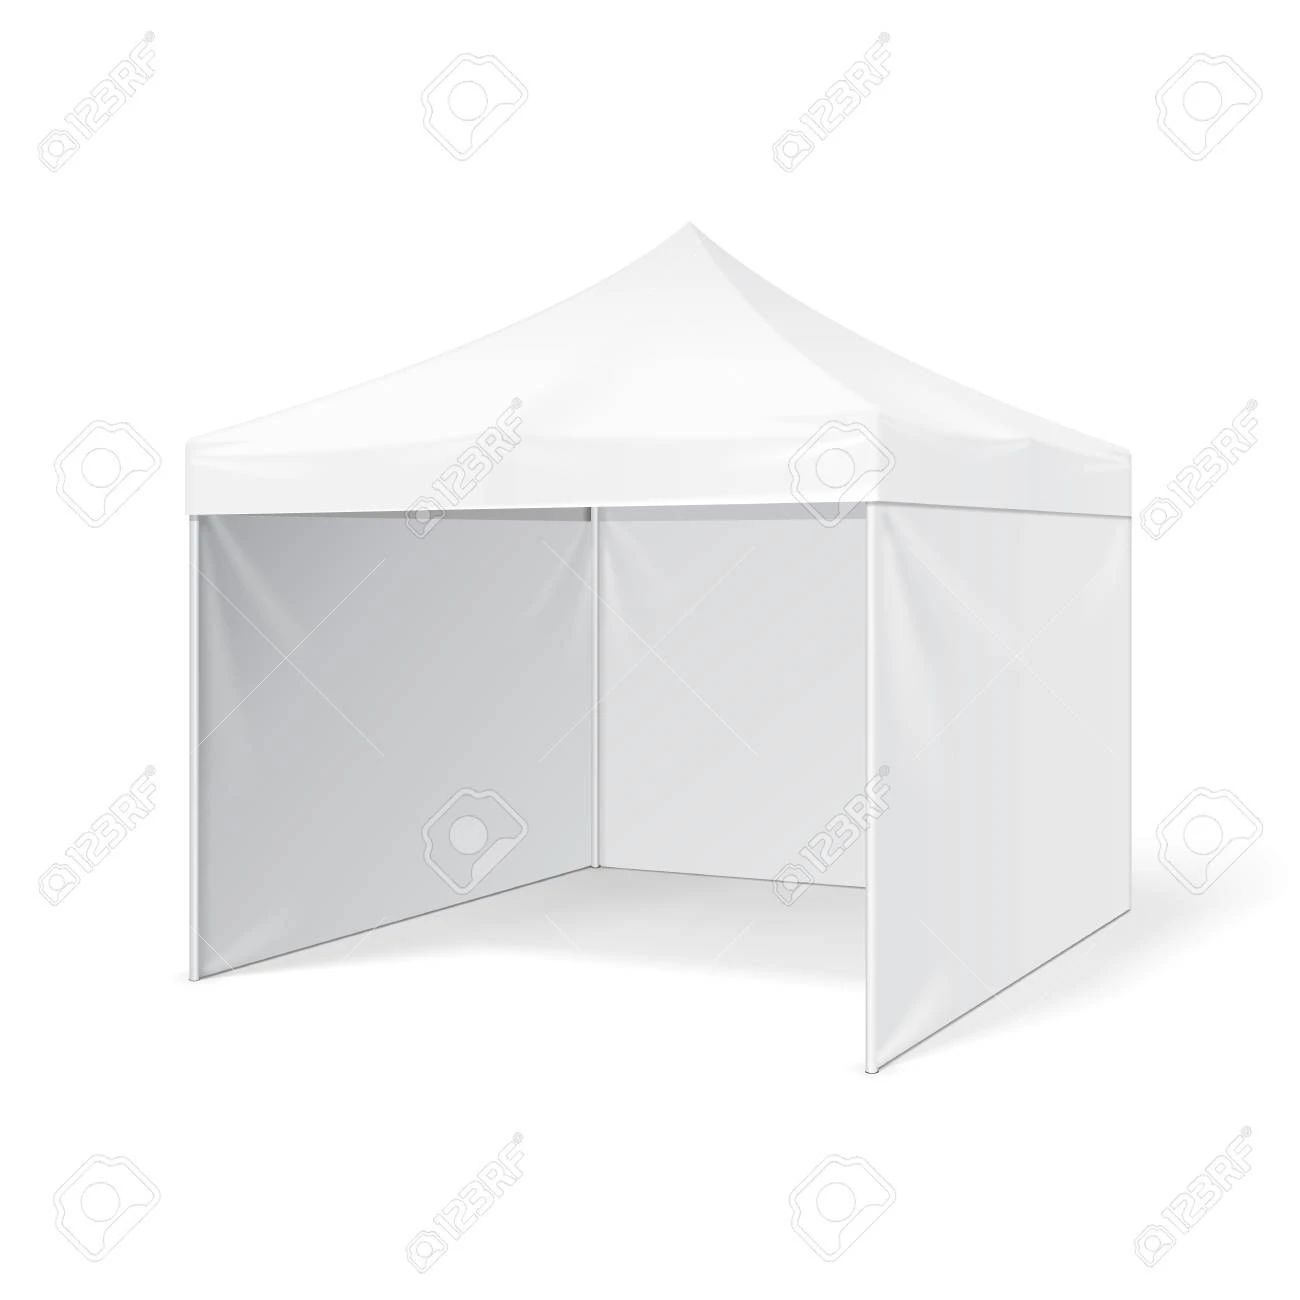 better quality 10 X 10 Aluminum Alloy Pop Up Gazebo Trade Show Tents Promotion Tent Outdoor advertising tent